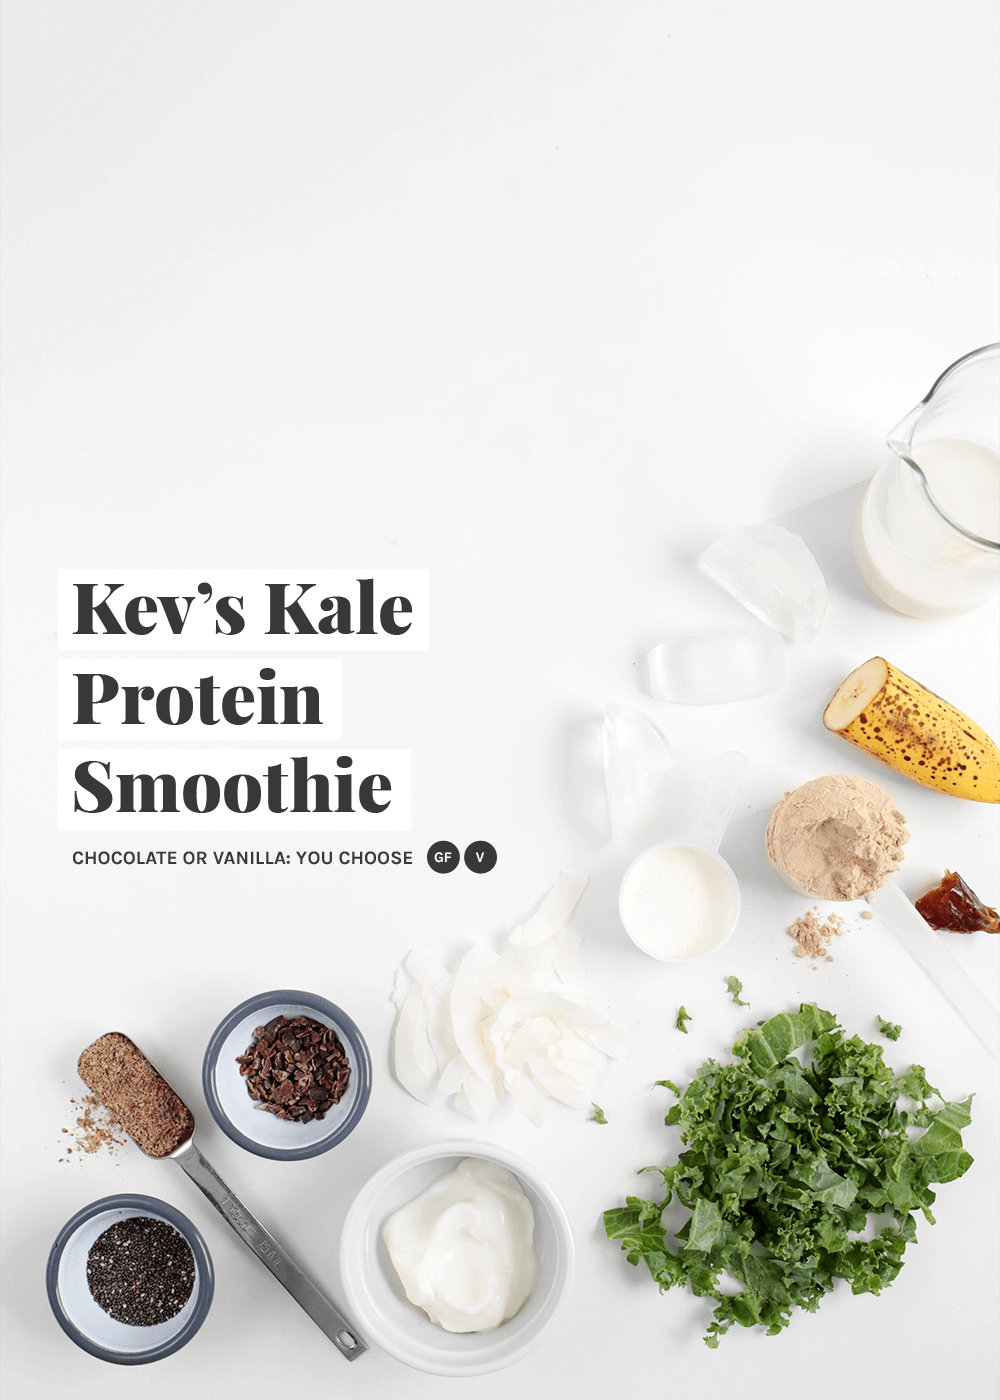 Kev's Kale Protein Smoothie chocolate or vanilla from the faux martha